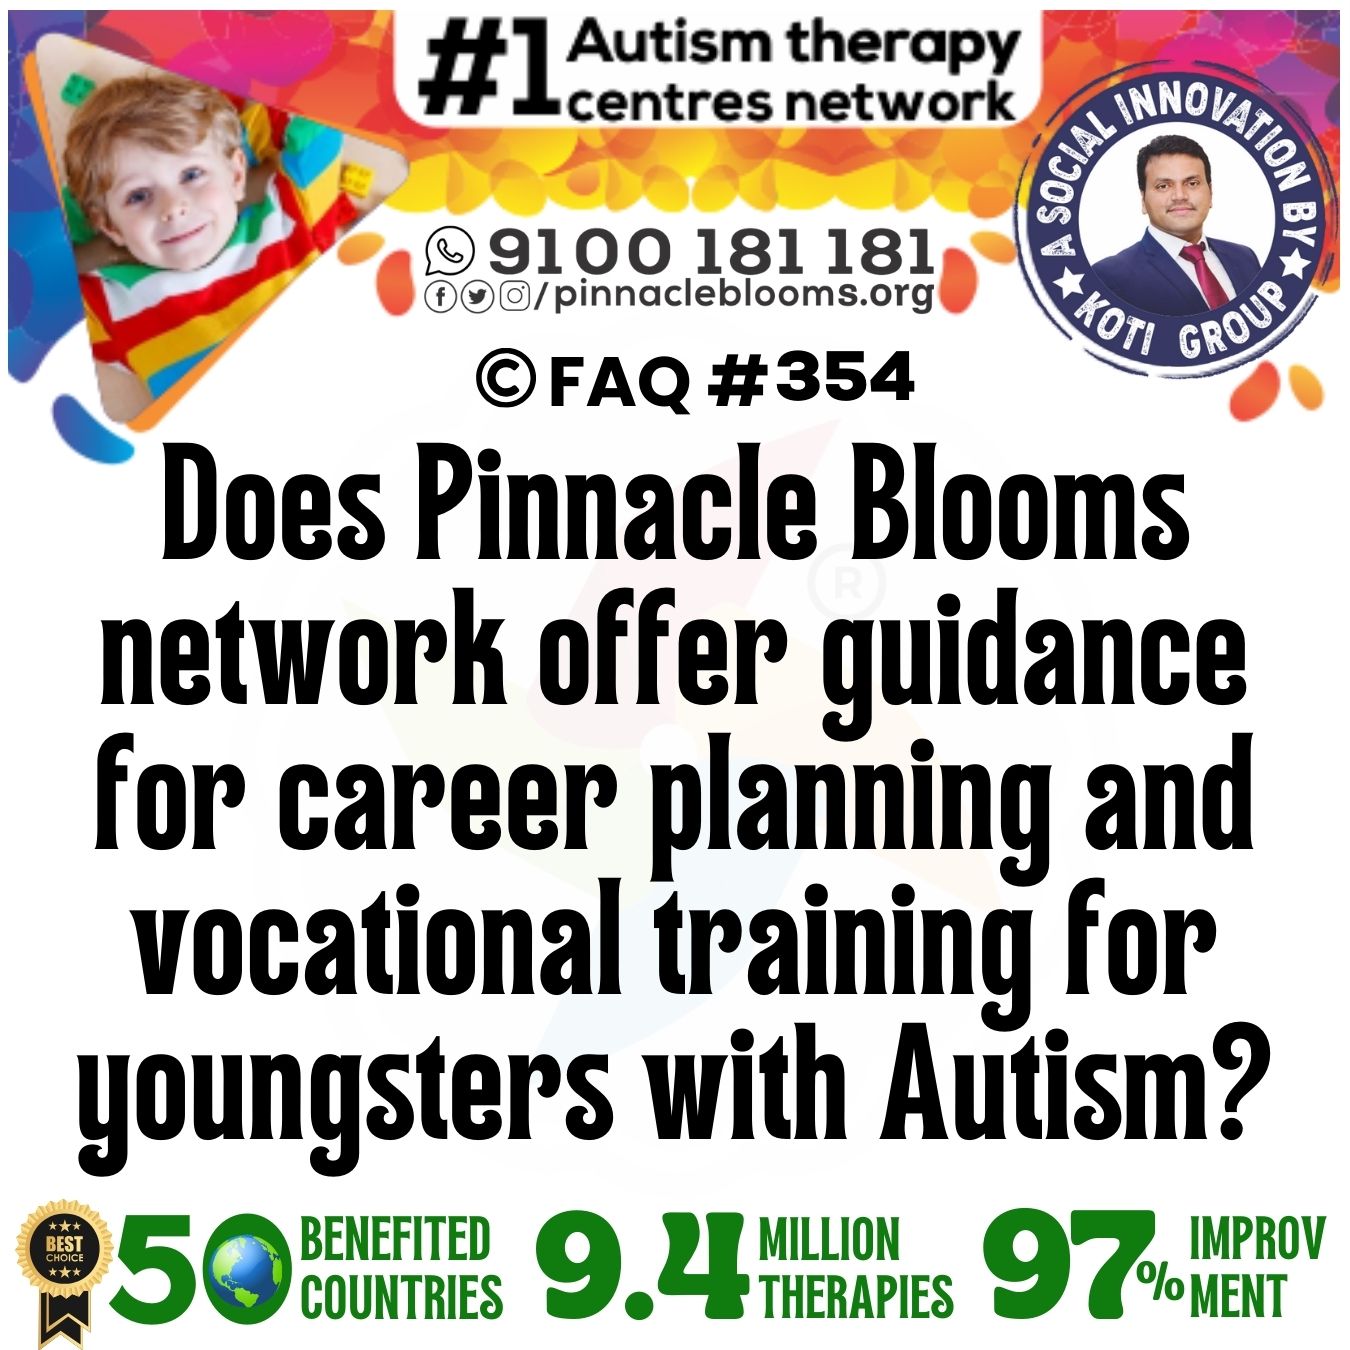 Does Pinnacle Blooms network offer guidance for career planning and vocational training for youngsters with Autism?